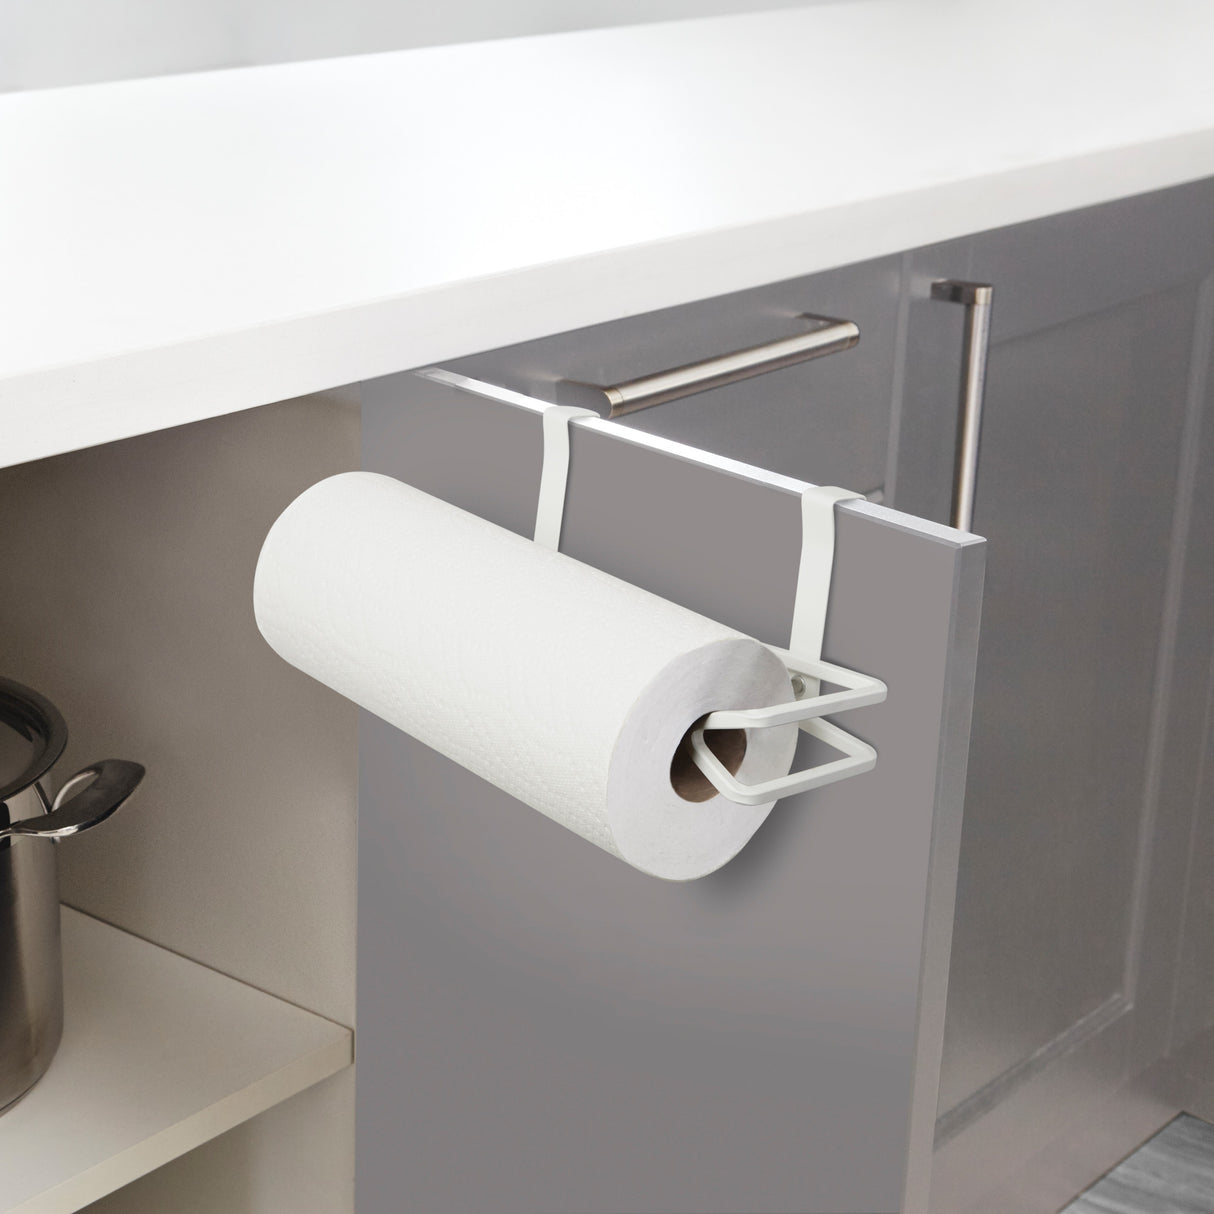 Countertop Paper Towel Holders | color: White